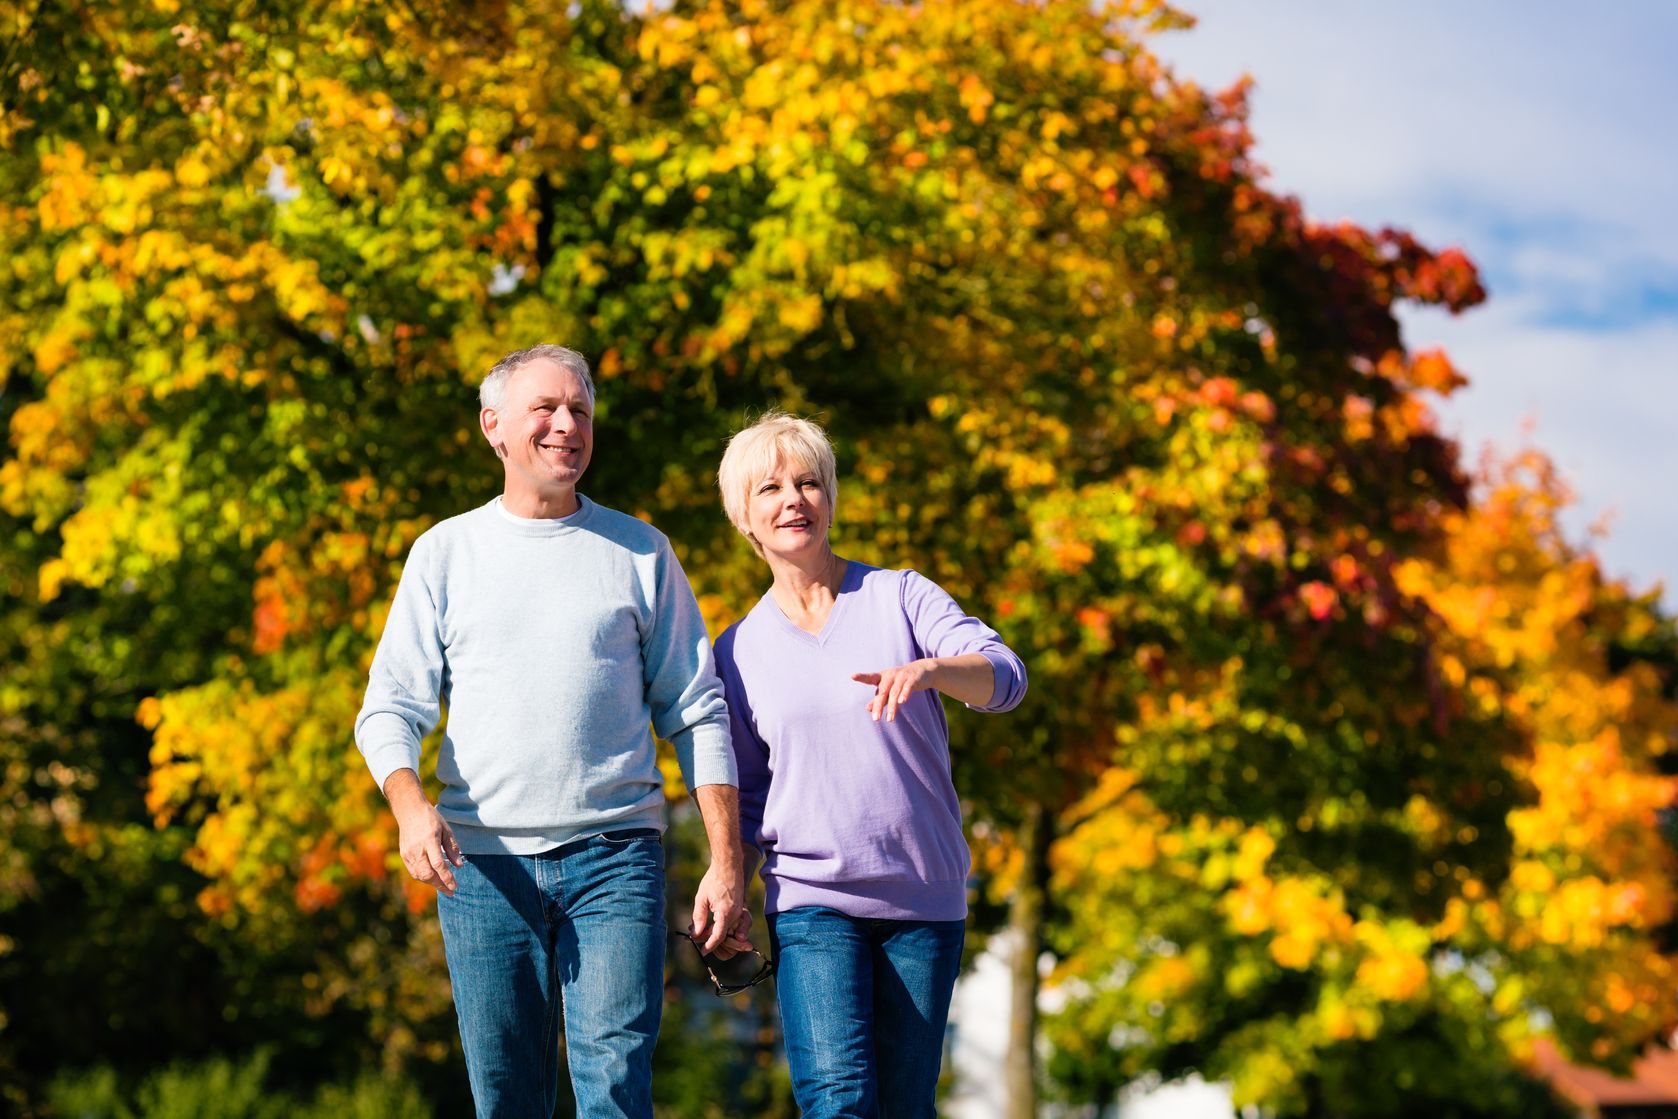 Healthy Fall Foods for the Active Senior